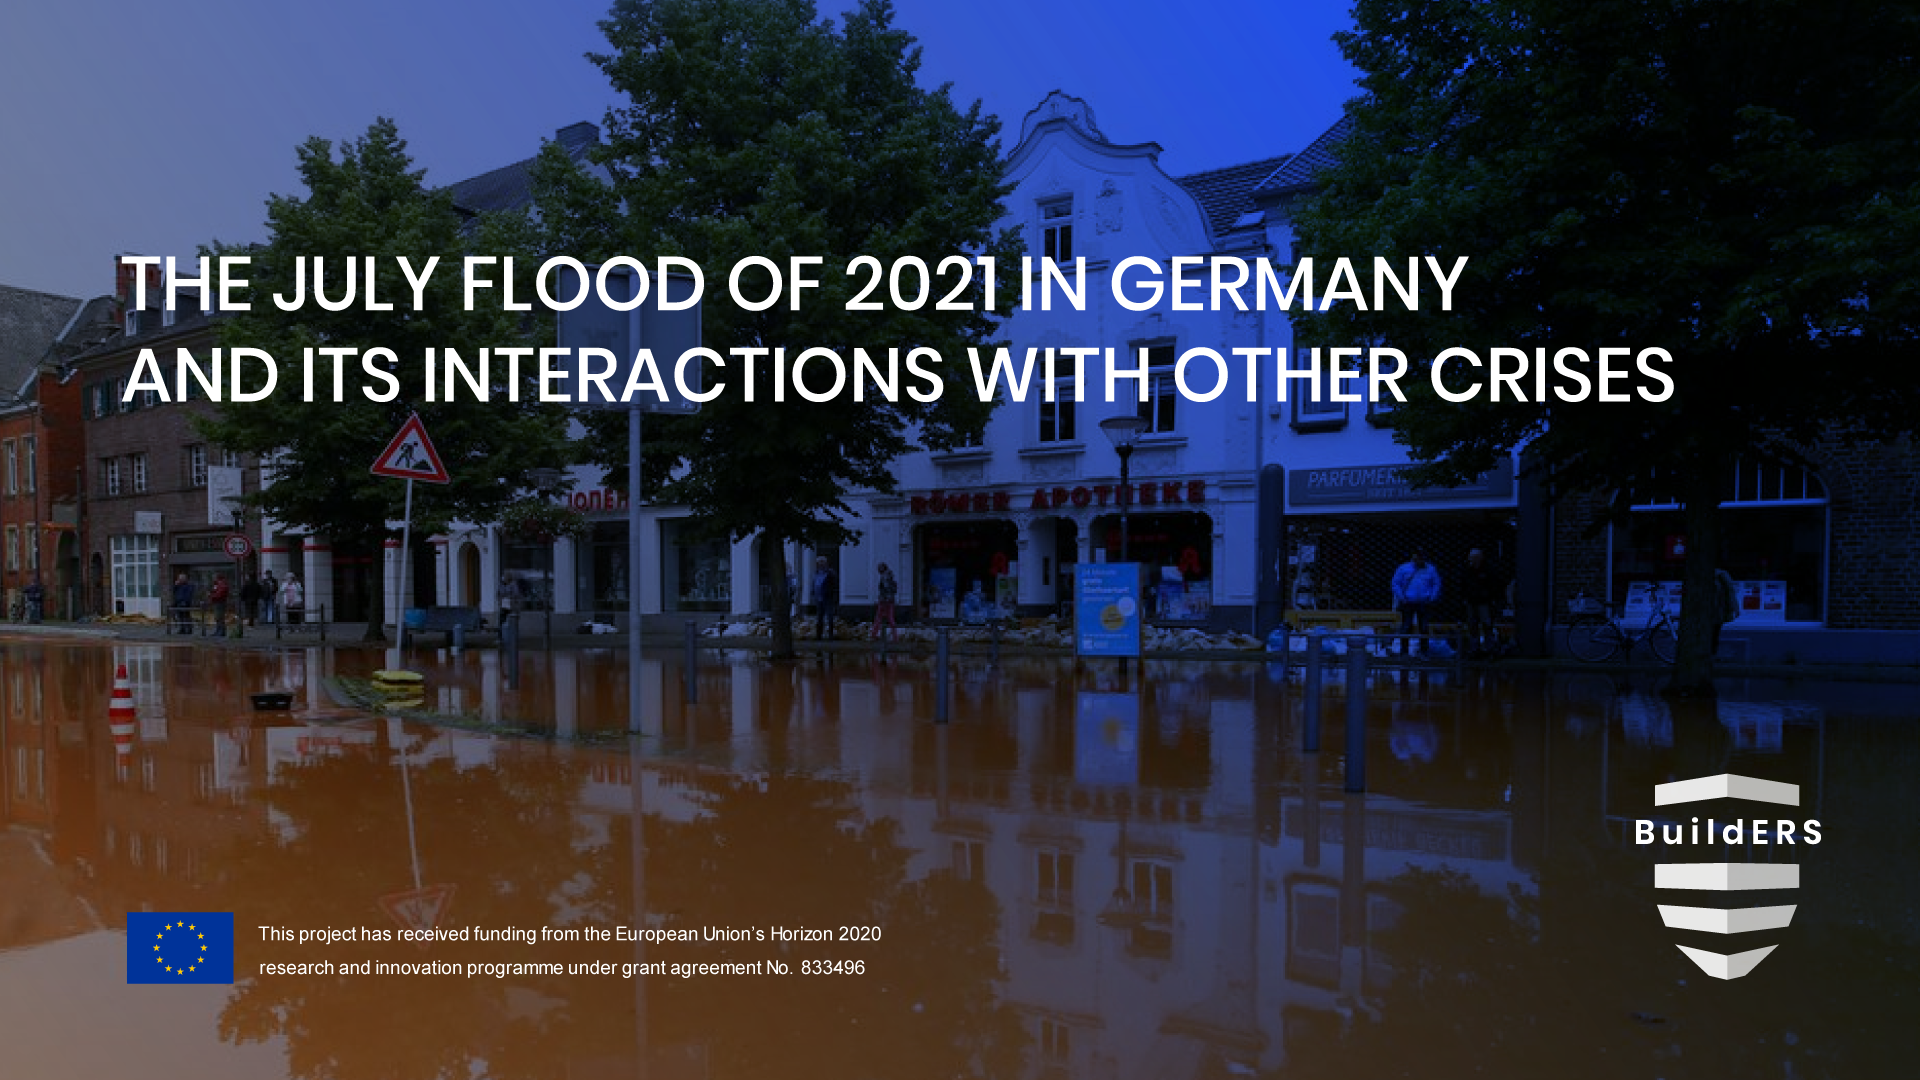 The July Flood of 2021 in Germany and its interactions with other crises